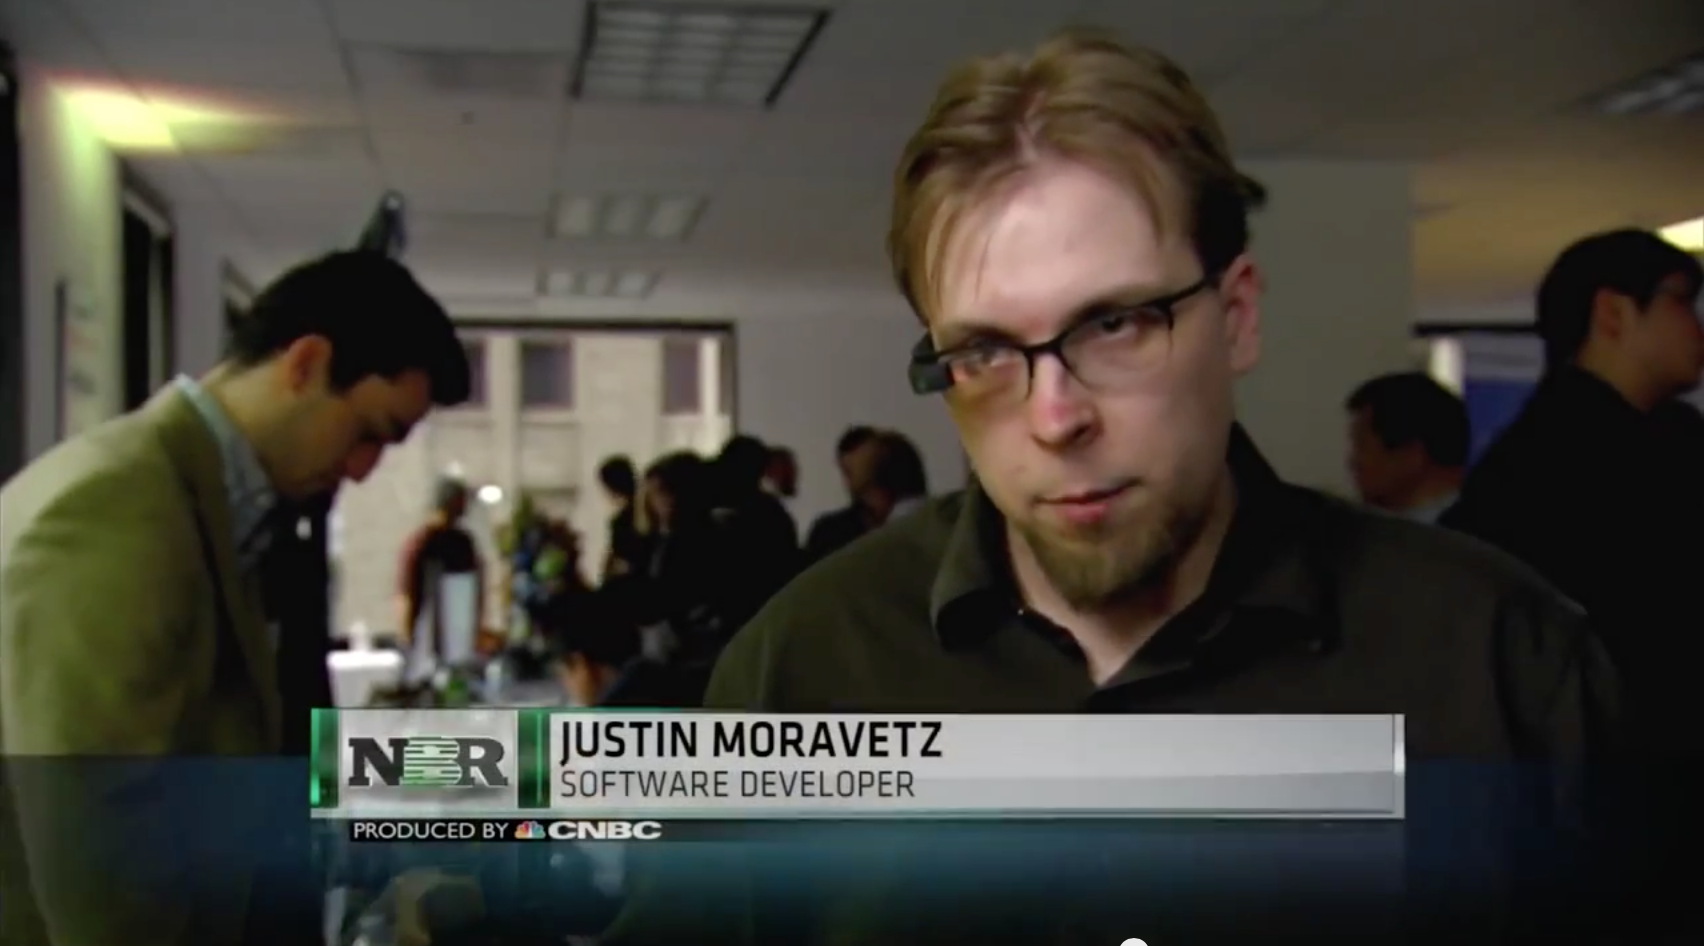 NBC’s Nightly Business Report talks to Justin Moravetz about Virtual Reality at GDC